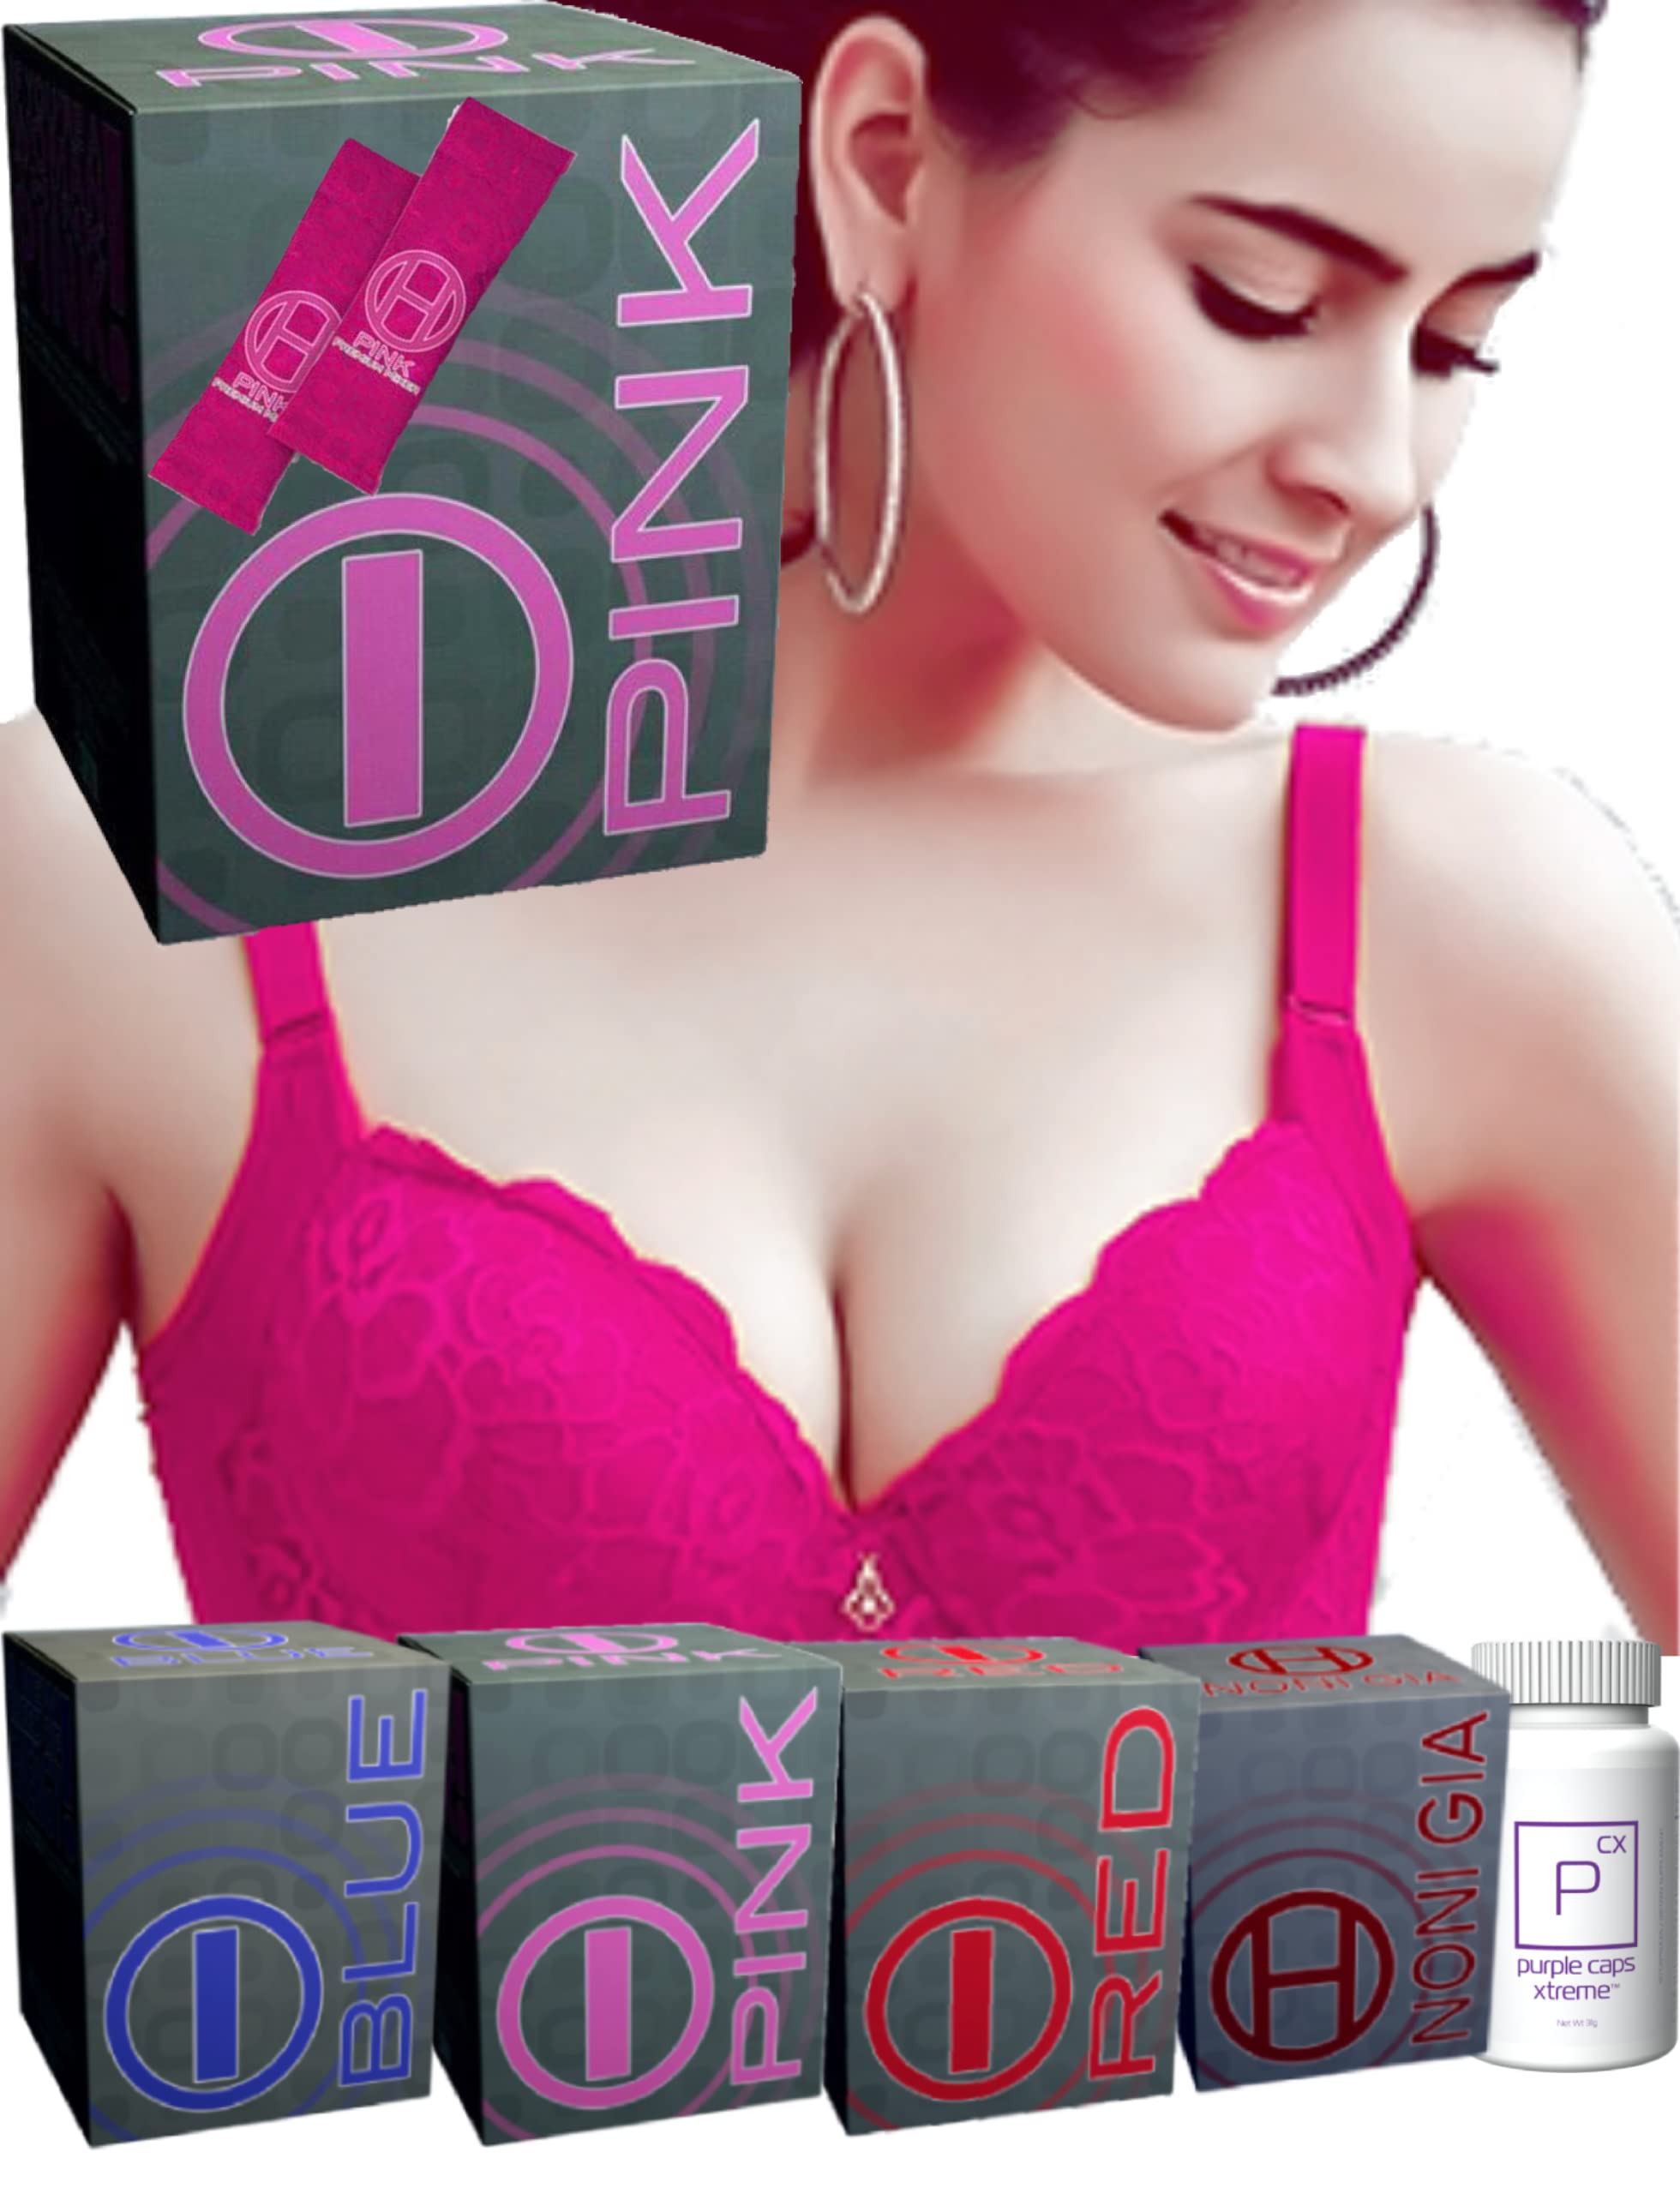 Pink - Revolutionary Energy Drink For Today's Woman - 100% Natural - NO CRASH - (30 Individual Servings) Try It.Feel It.Share It.